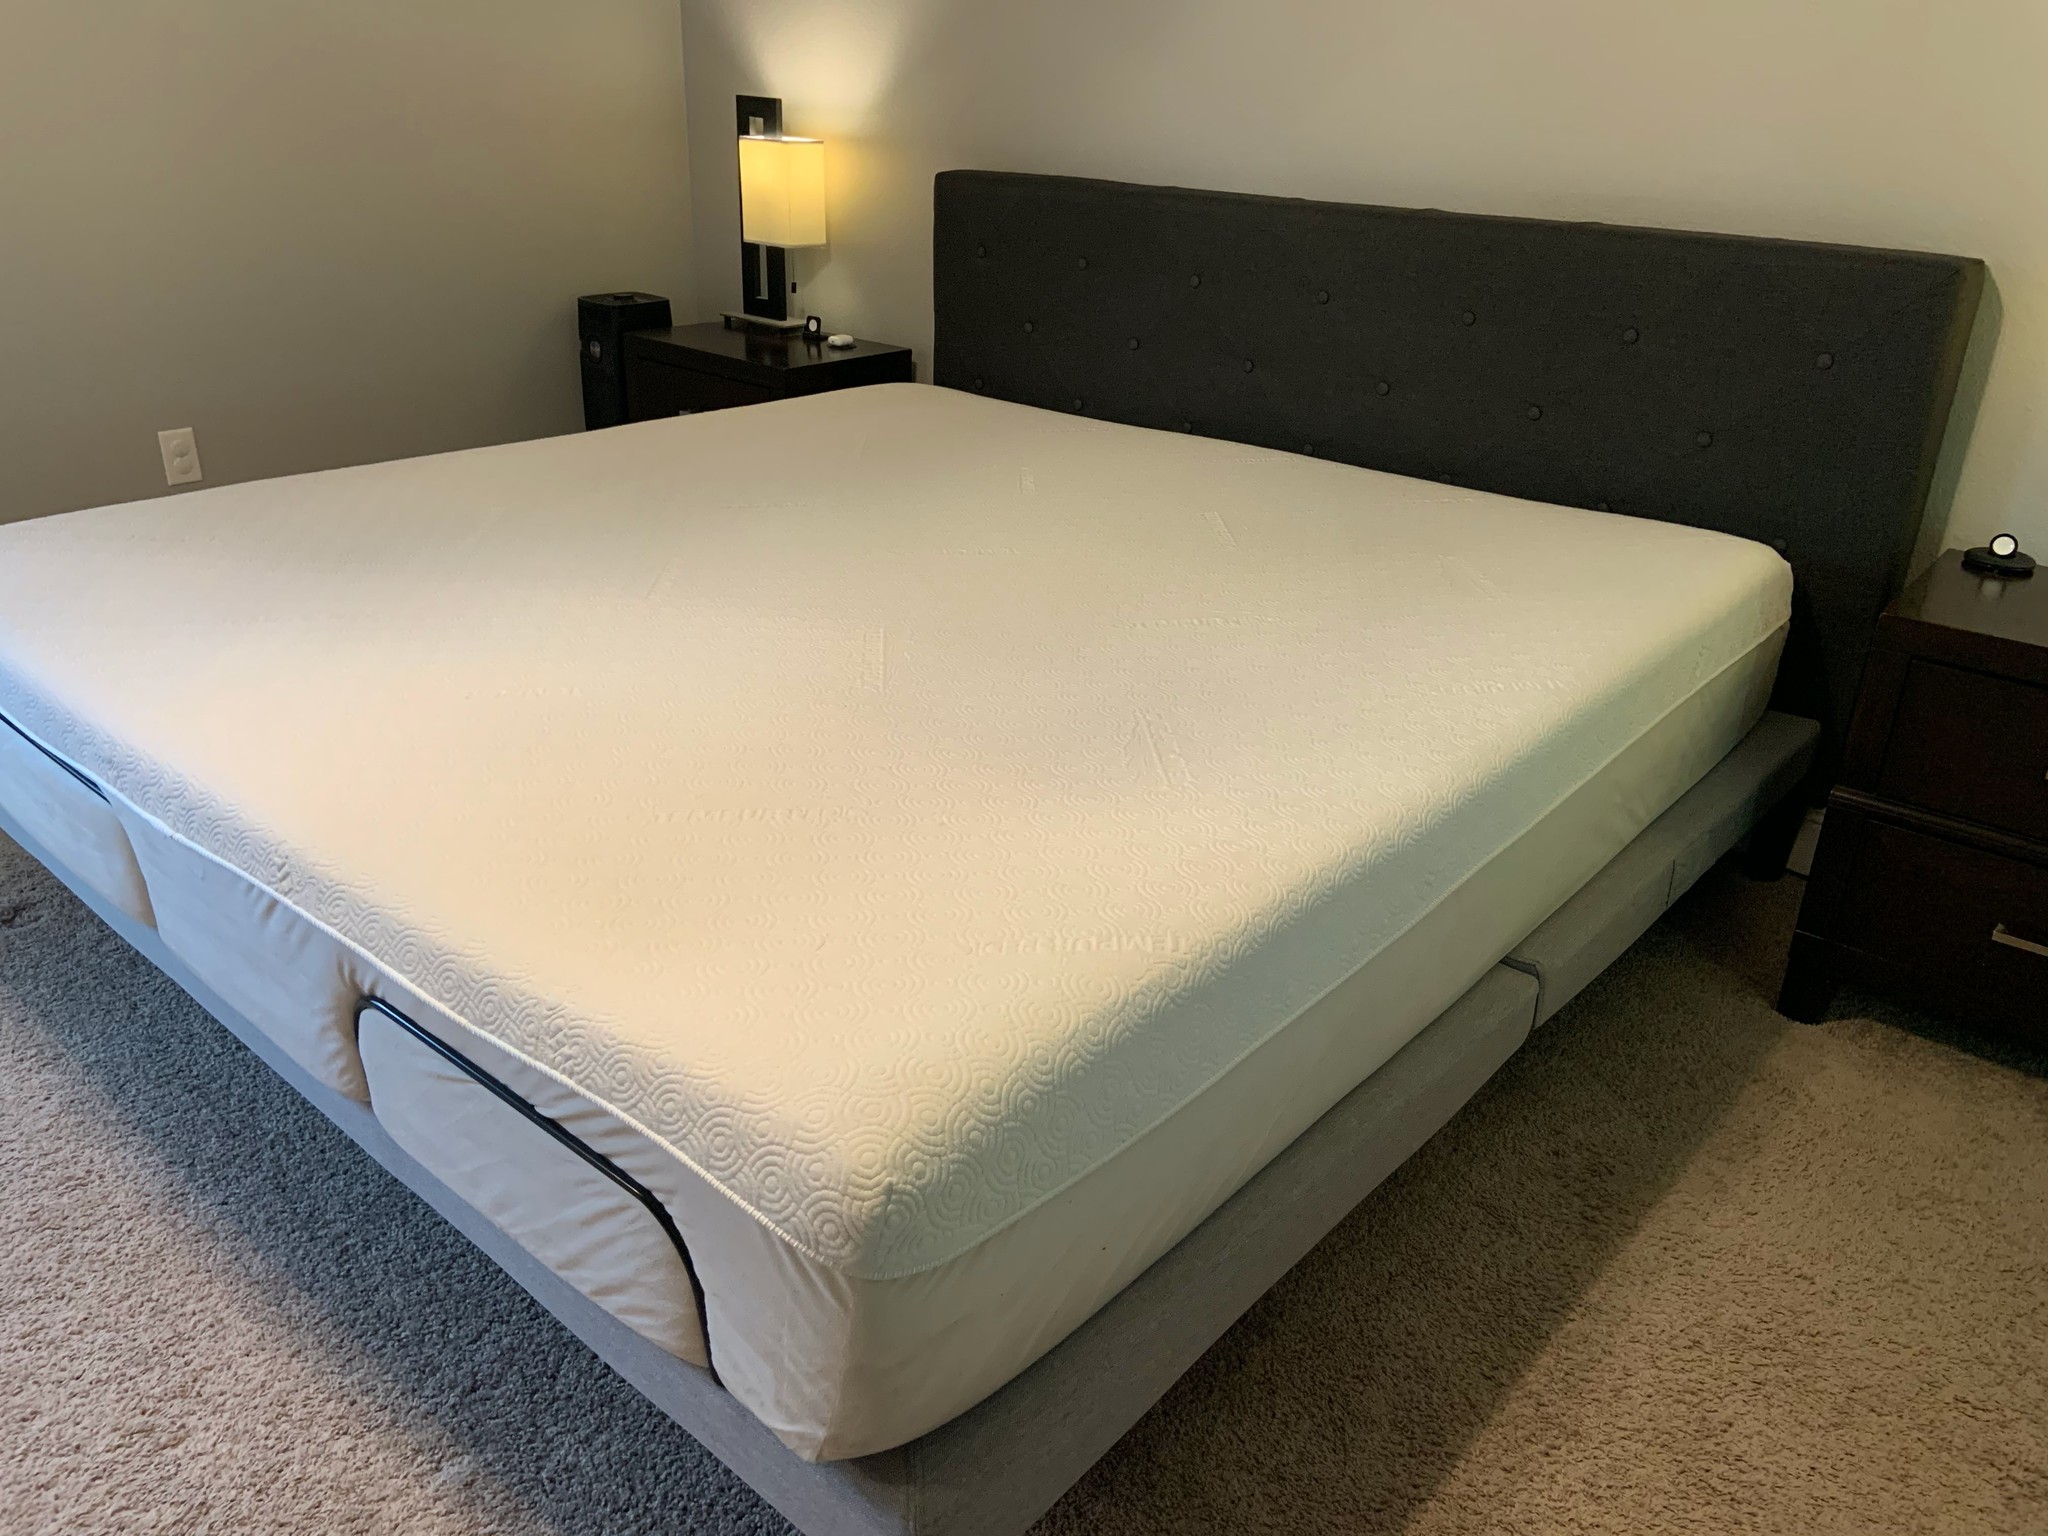 Malouf M555 Adjustable Bed Base in a flat position